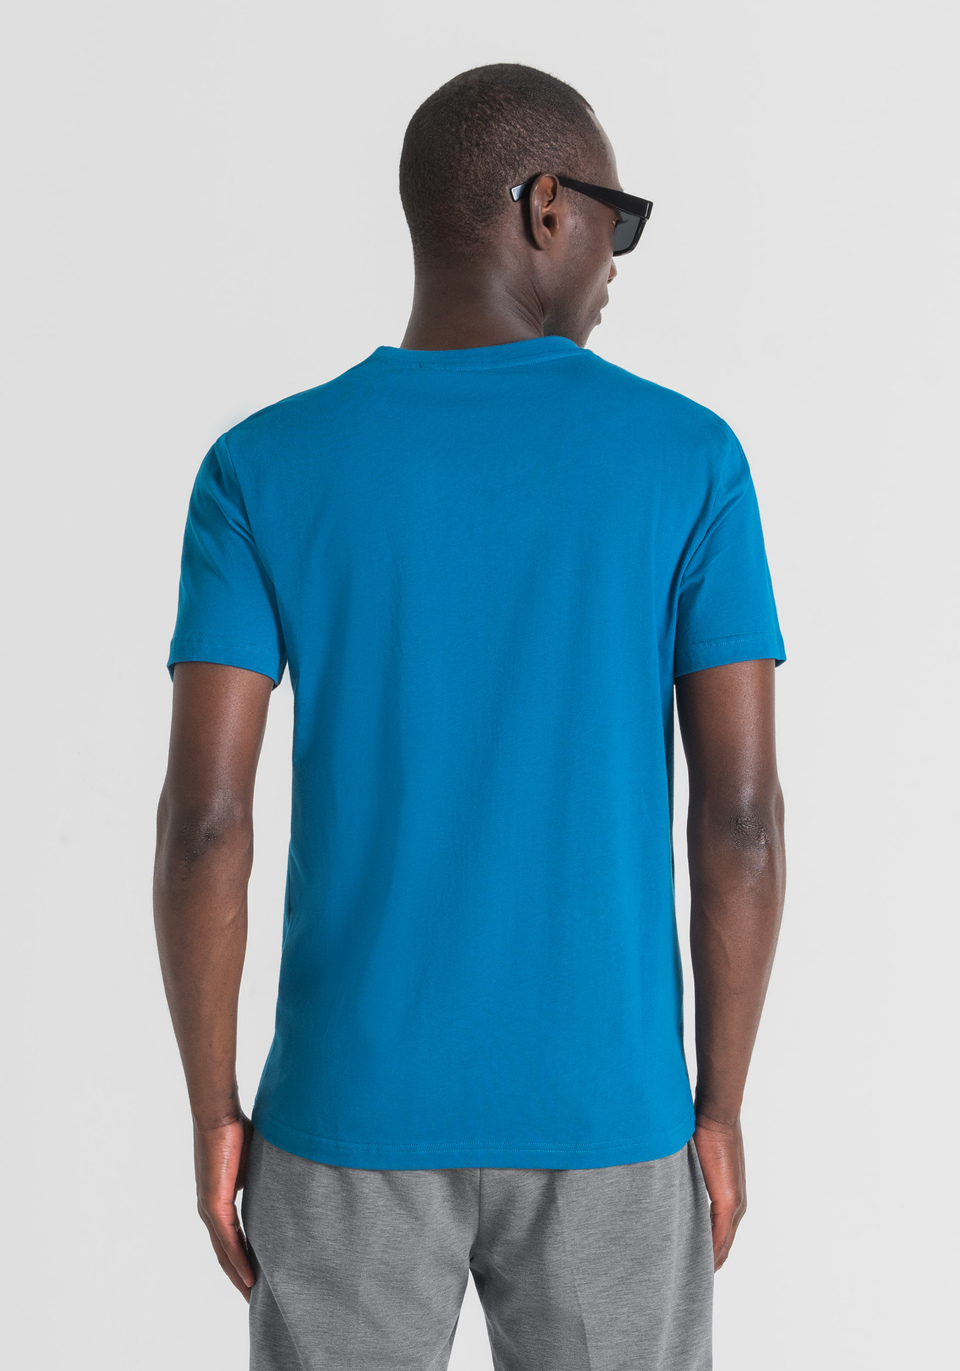 SLIM-FIT T-SHIRT IN PURE COTTON WITH FLOCKED LOGO PRINT - Antony Morato Online Shop